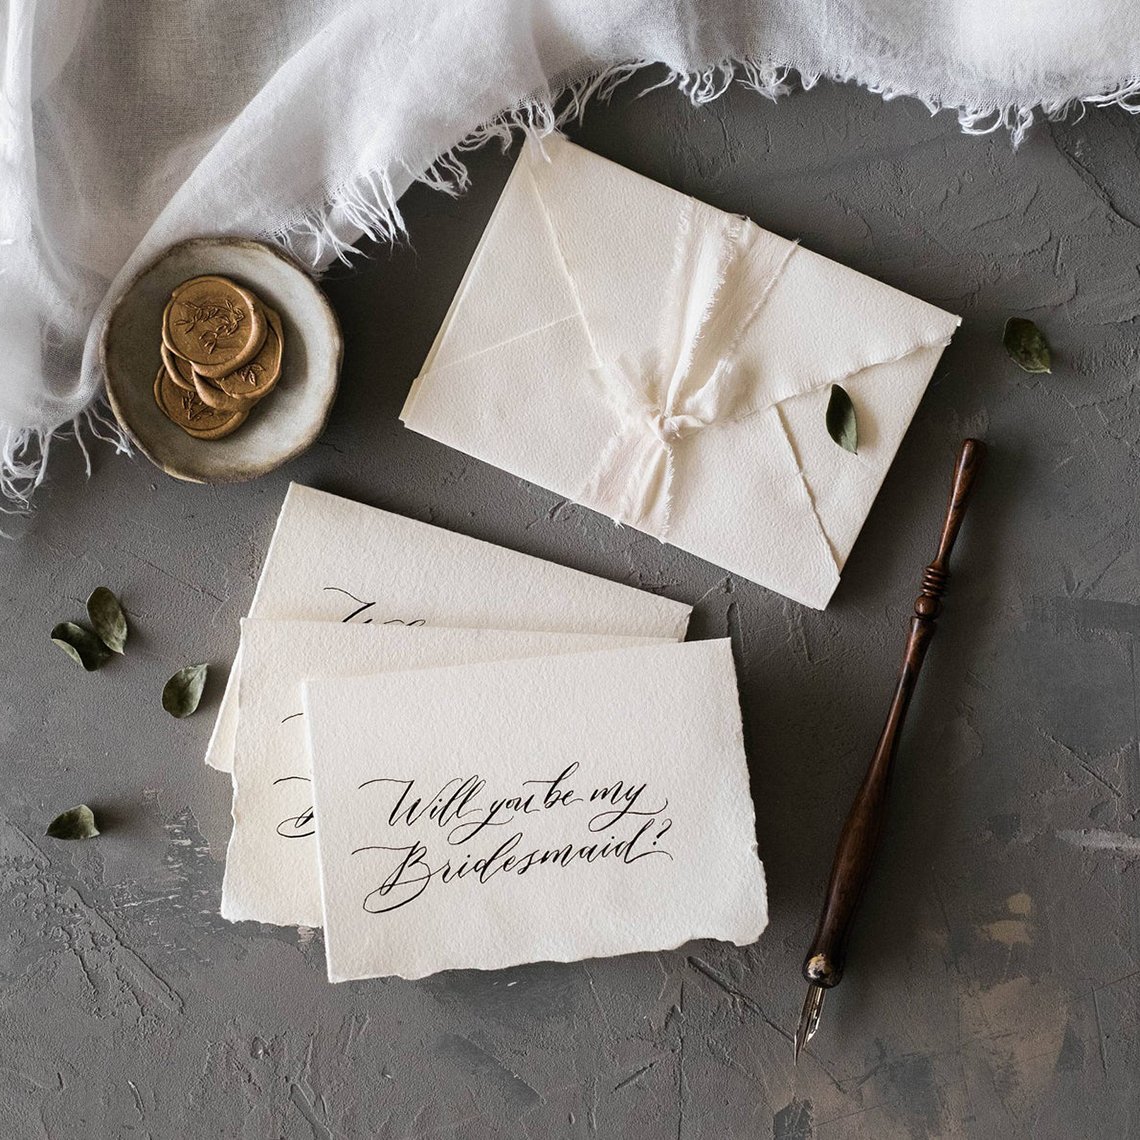 The Best Will You Be My Bridesmaid Cards Bridal Musings 7 - 20 tấm thiệp "Will You Be My Bridesmaid" hay nhất